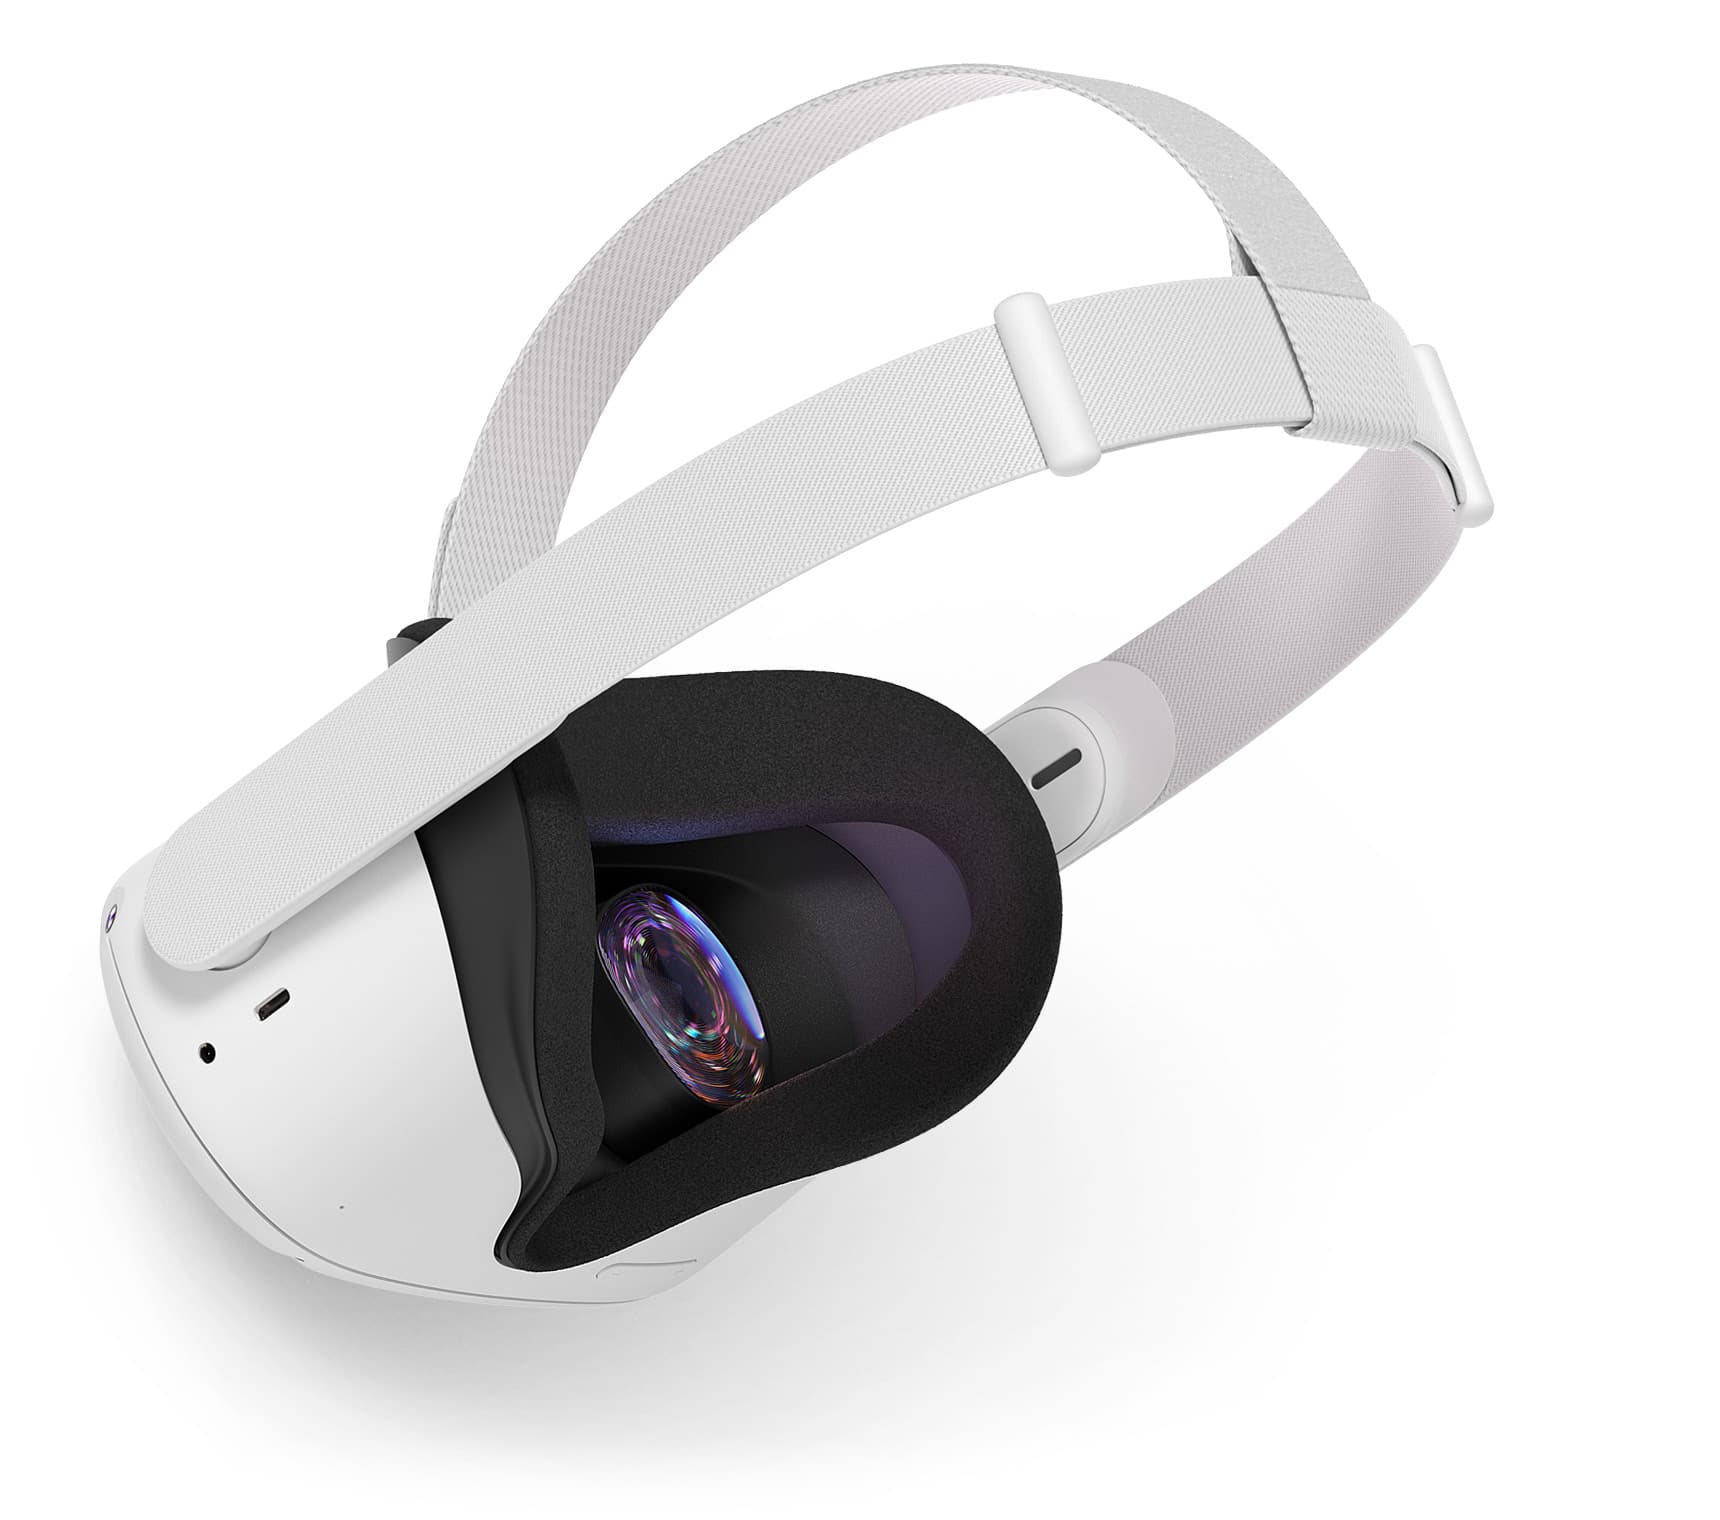 Oculus Quest 2 VR Headset Preorders 5 Times the Original - NewsWatchTV